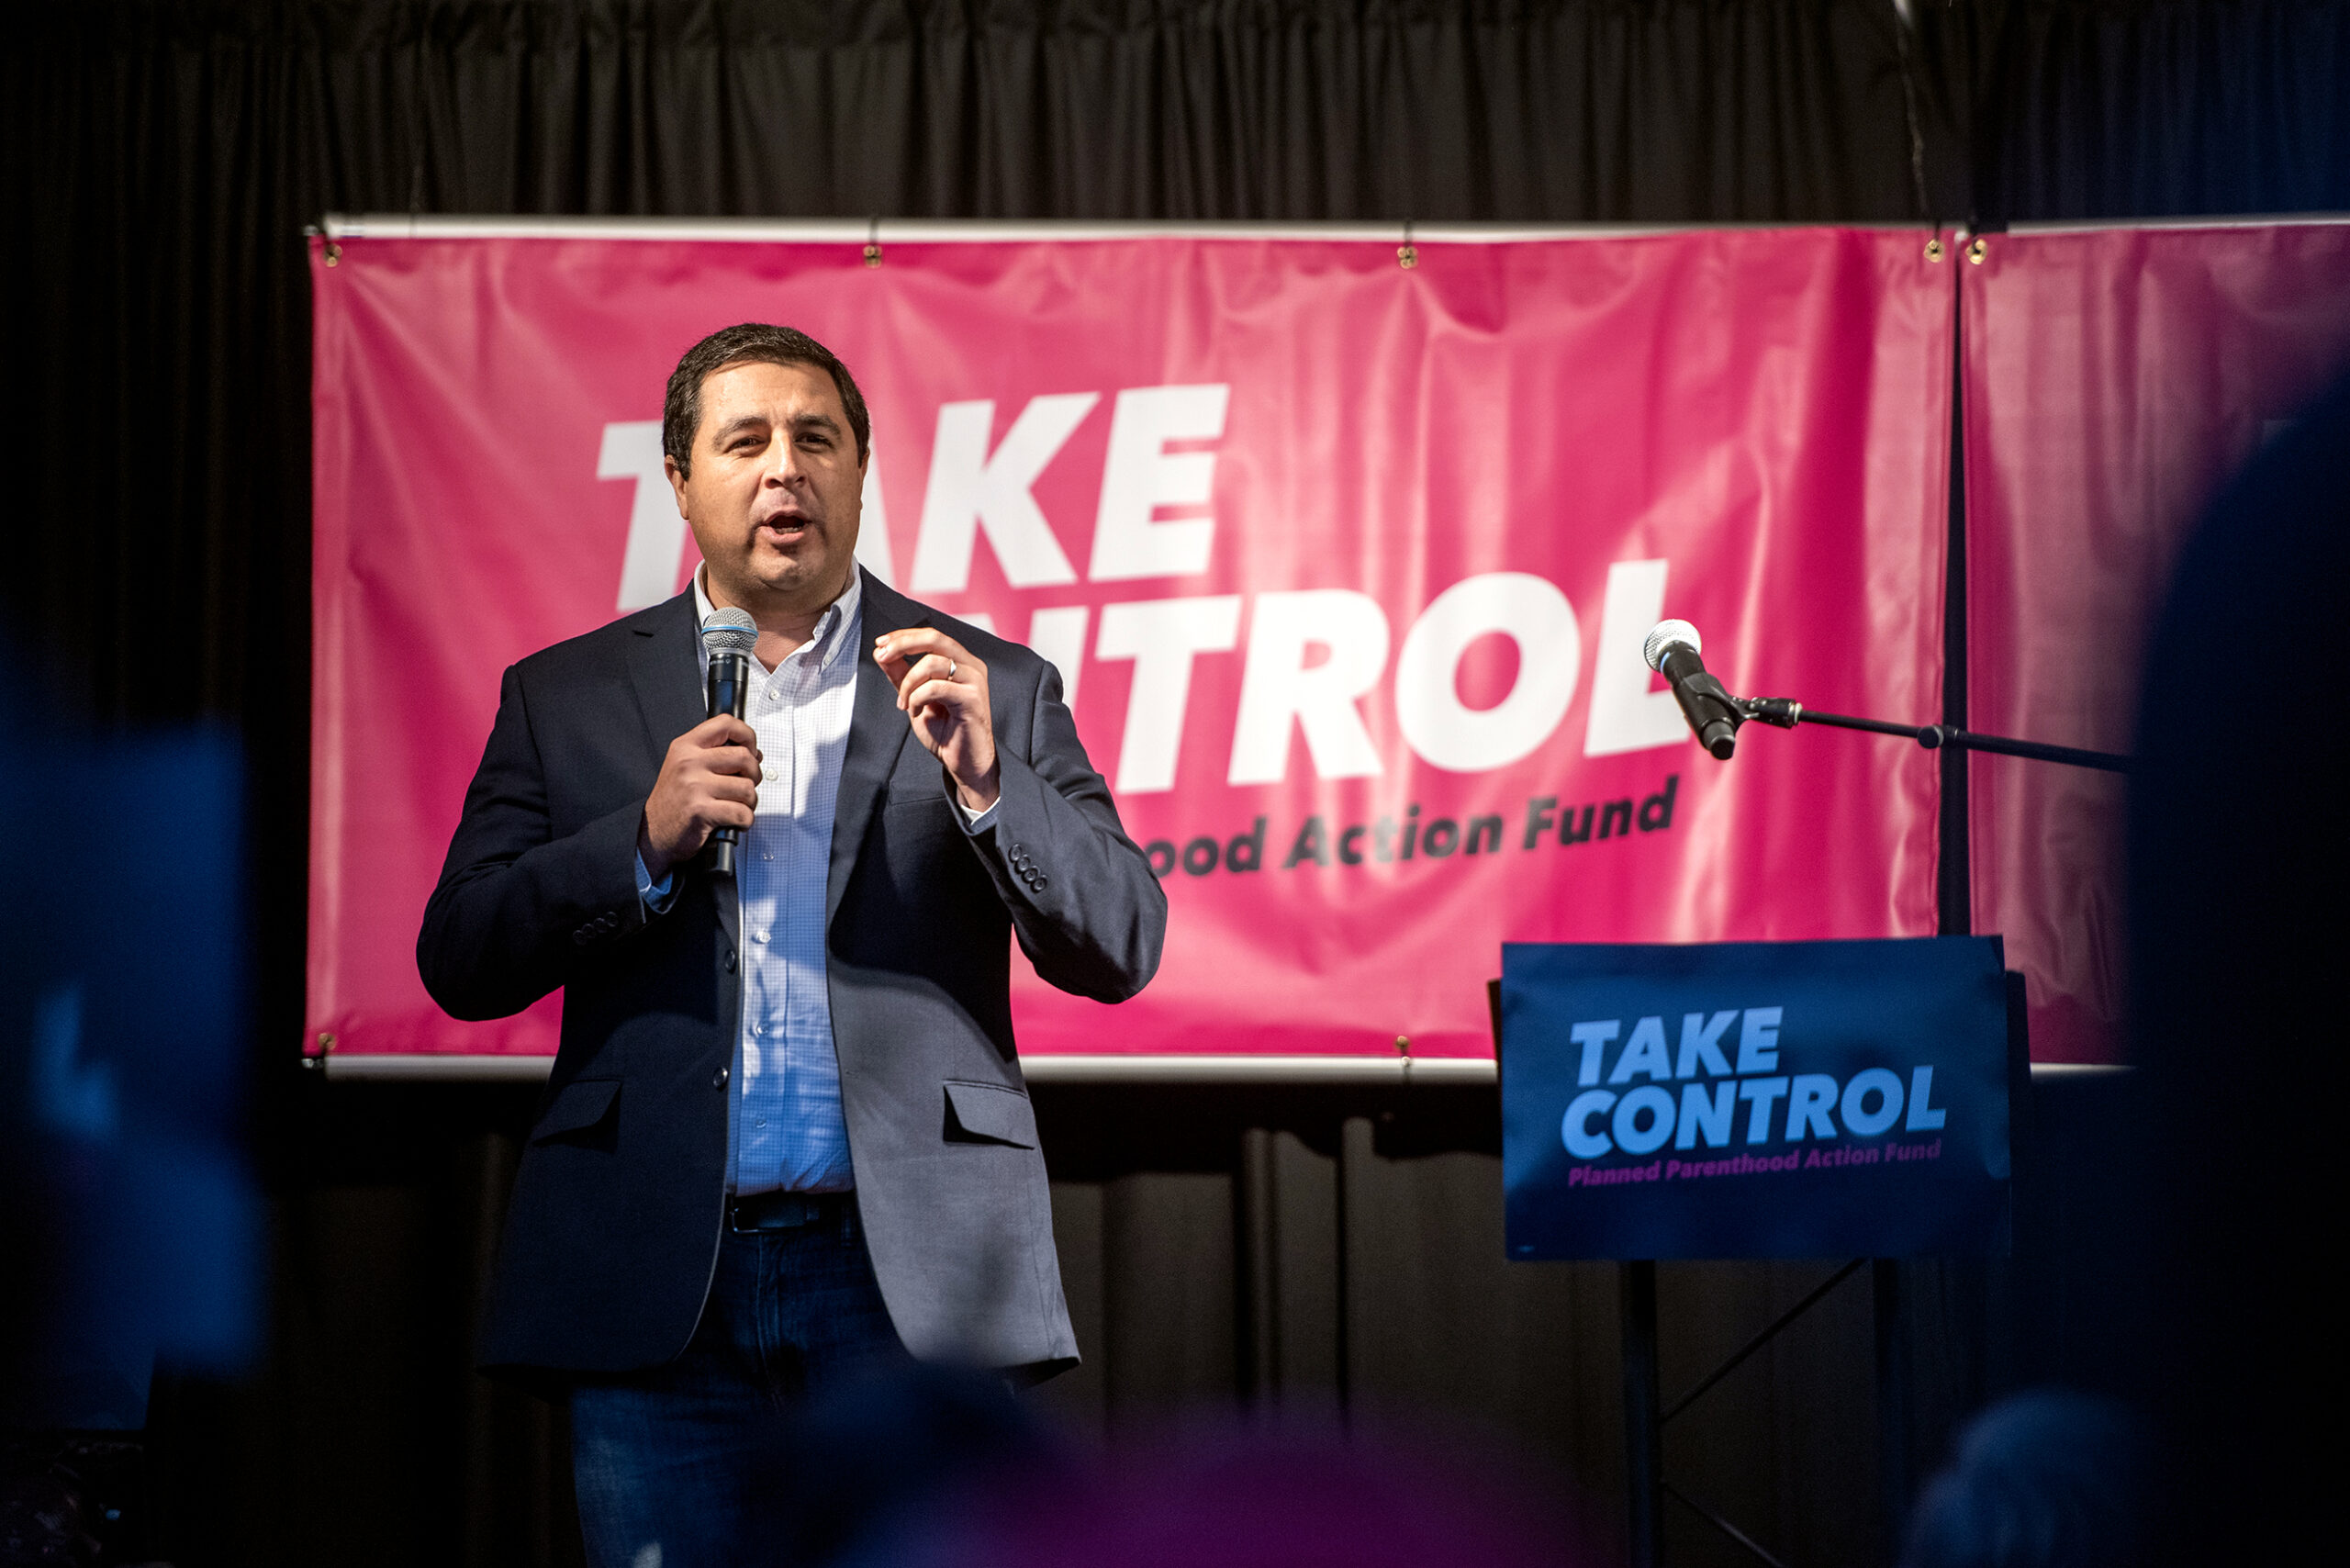 Attorney General Josh Kaul stands in front of a pink Planned Parenthood banner that says "take control" as he speaks into a microphone on stage.